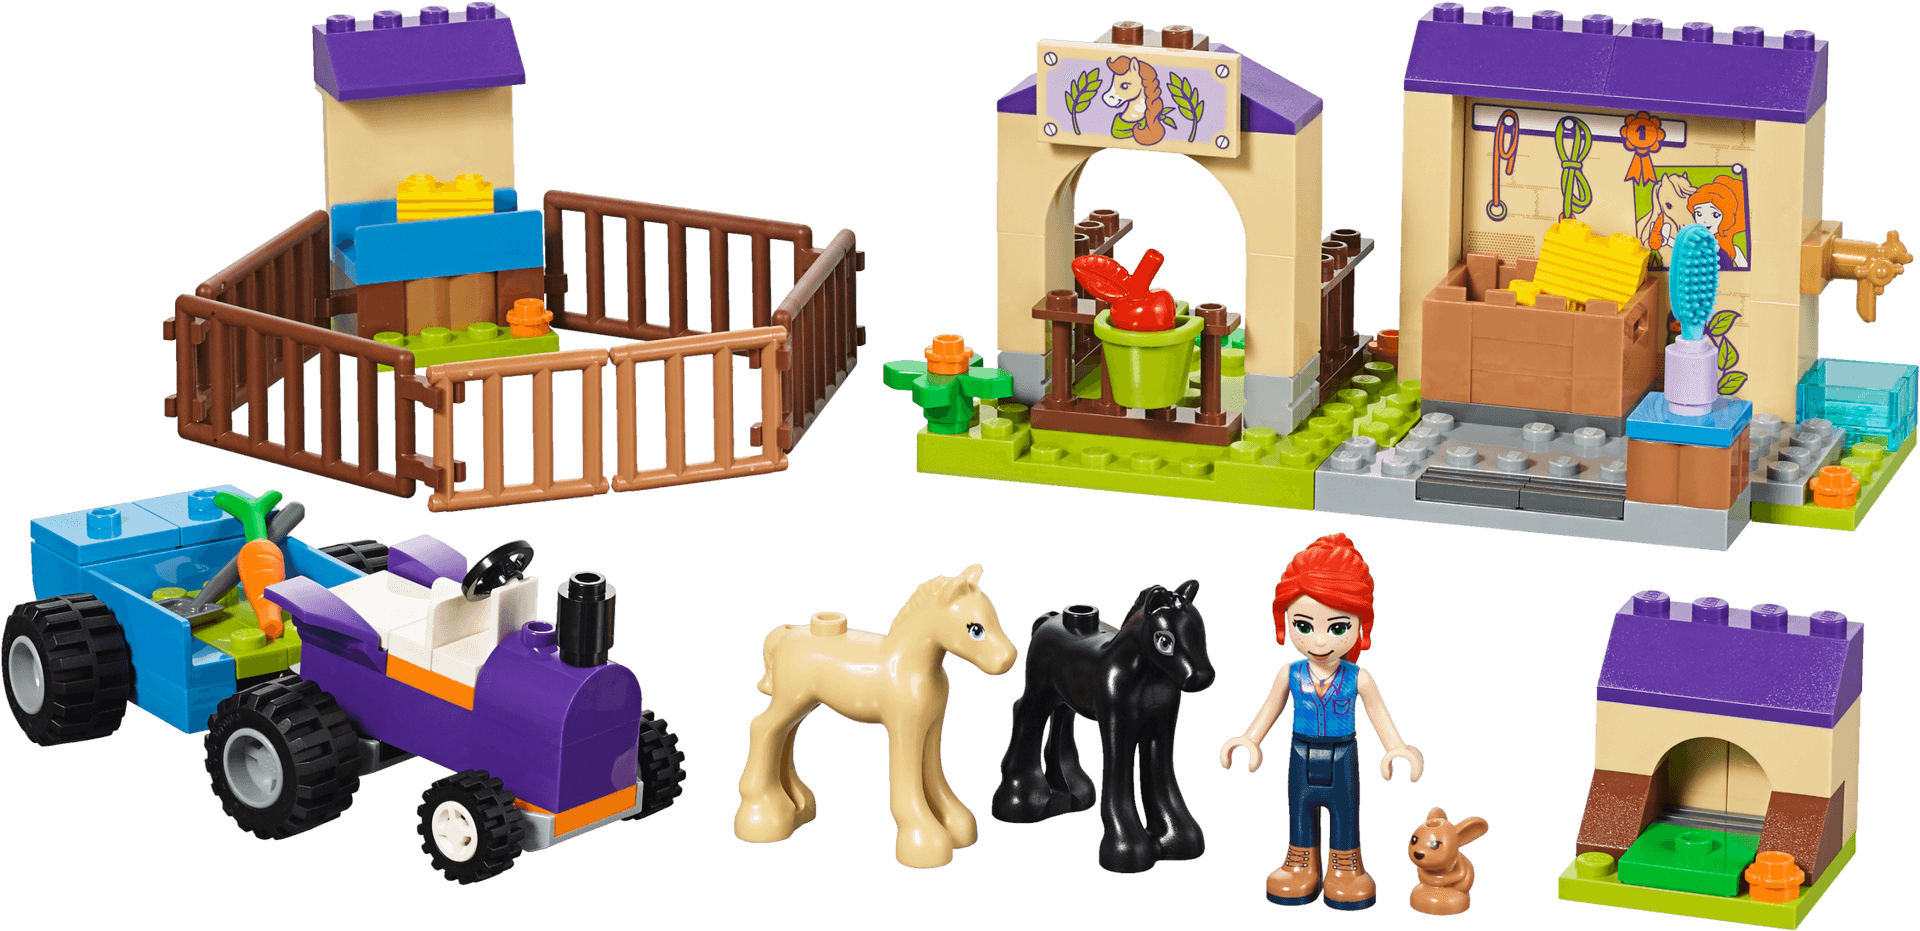 Toy Farm Playsetwith Foalsand Figures PNG